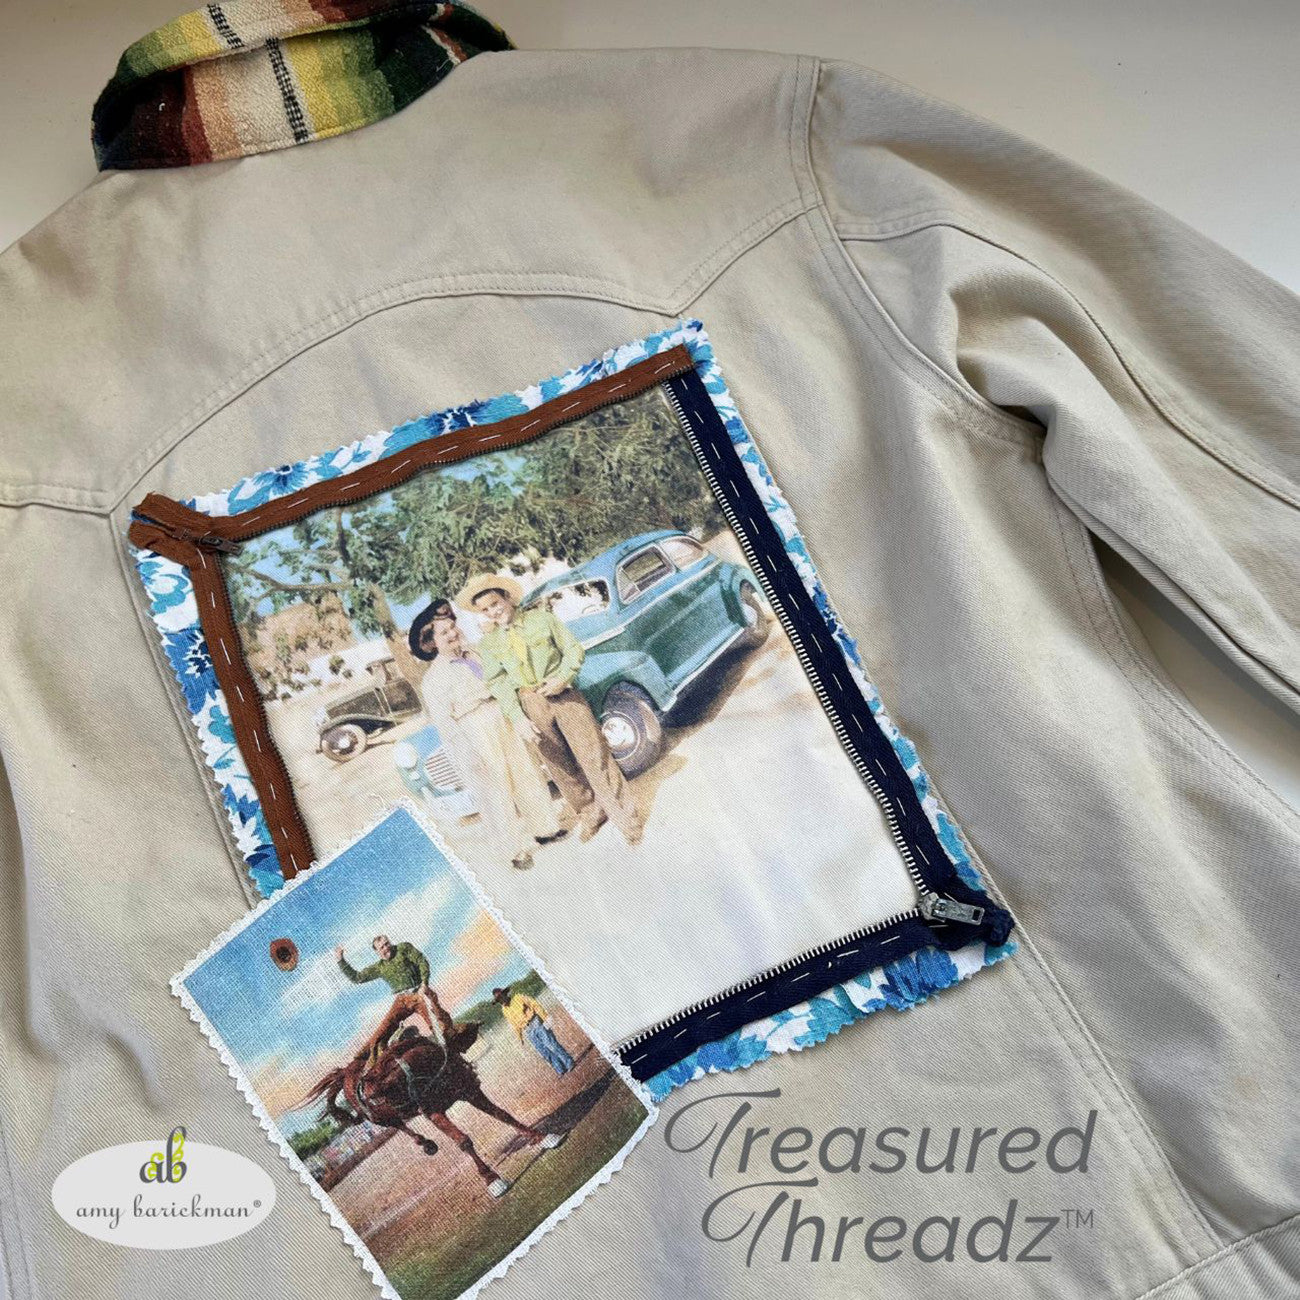 Western Rodeo Collage Panel by Amy Barickman for Treasured Threadz